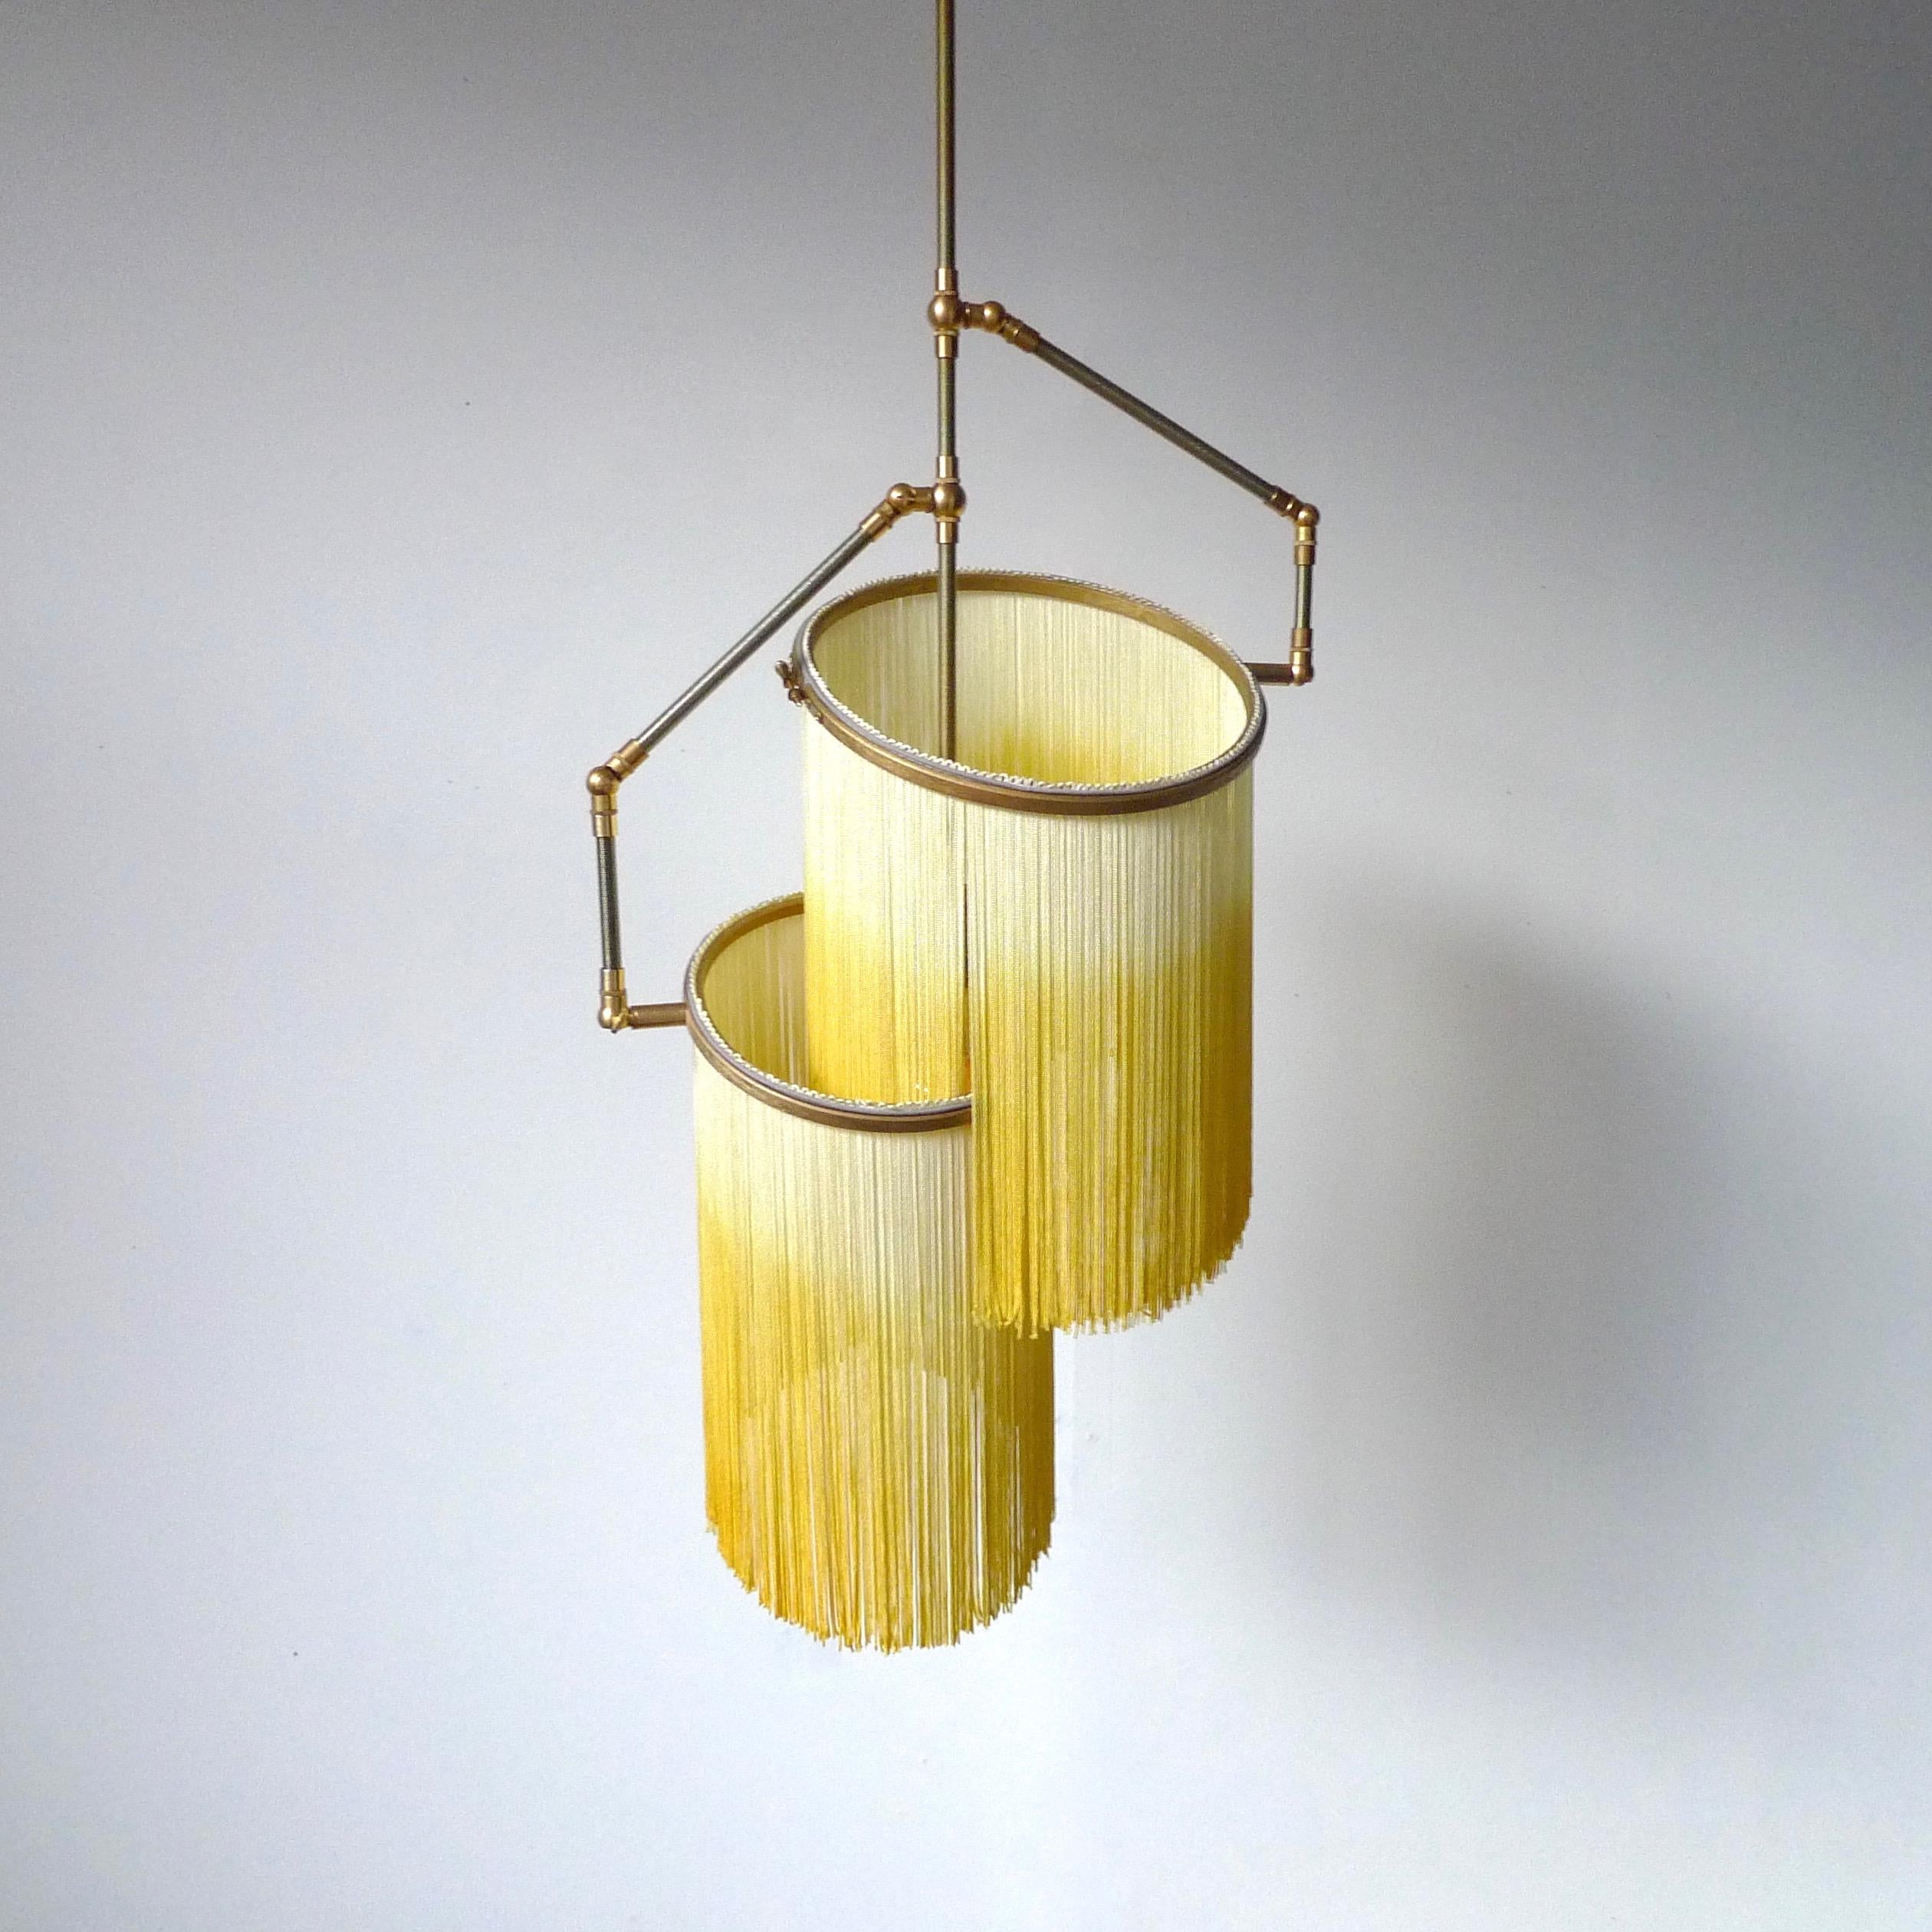 Yellow Charme pendant lamp, Sander Bottinga.

Dimensions: H 65 (can be customized) x W 38 x D 25 cm.
Hand-sculpted in brass, leather, wood and dip dyed colored Fringes in viscose.
The movable arms makes it possible to move the circles with fringes